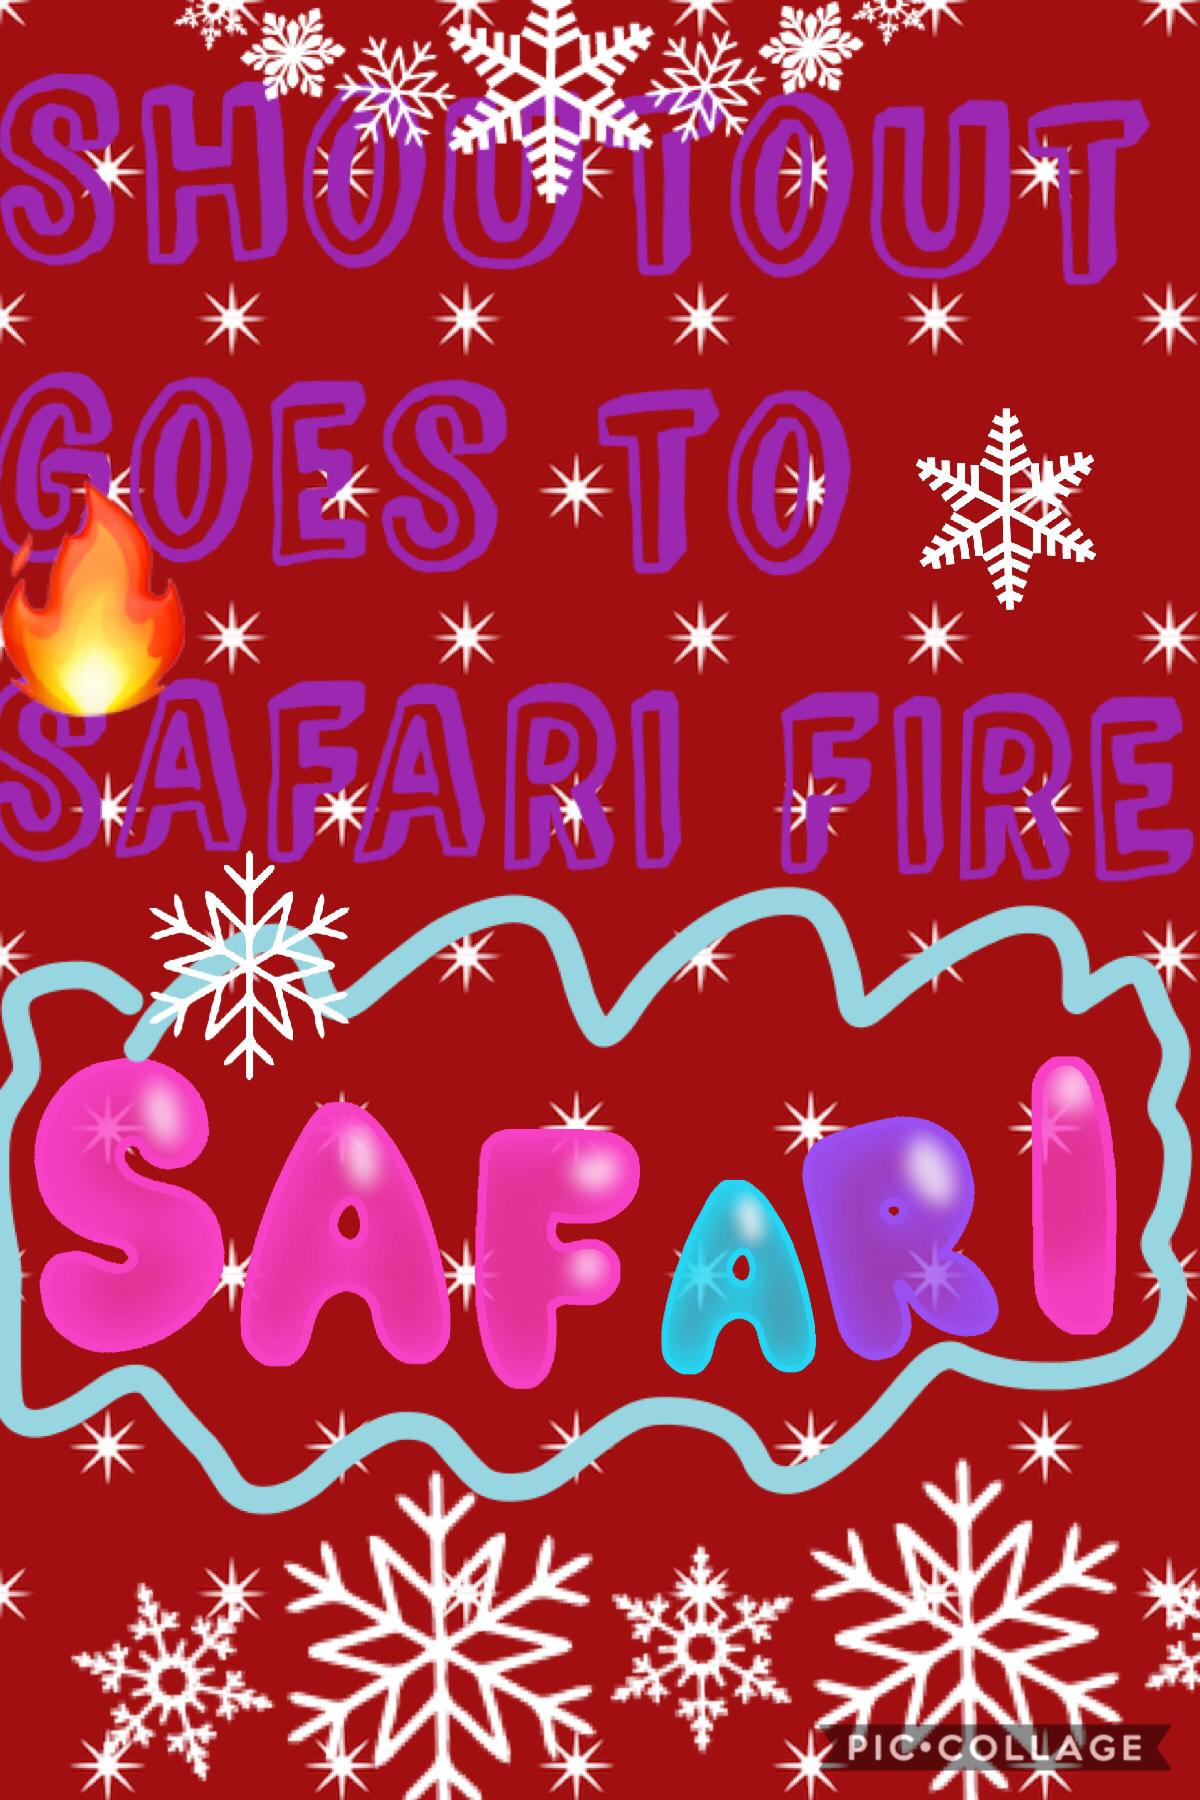 Hey guys Christmas 🎄 is in 5 days !!!! What should I get my sis she is a really complicated person to shop for. Anyways Safari Fire 🔥 is my shoutout here’s a deal if u comment on any collage u get a shoutout.Plus comment what I should get my sister